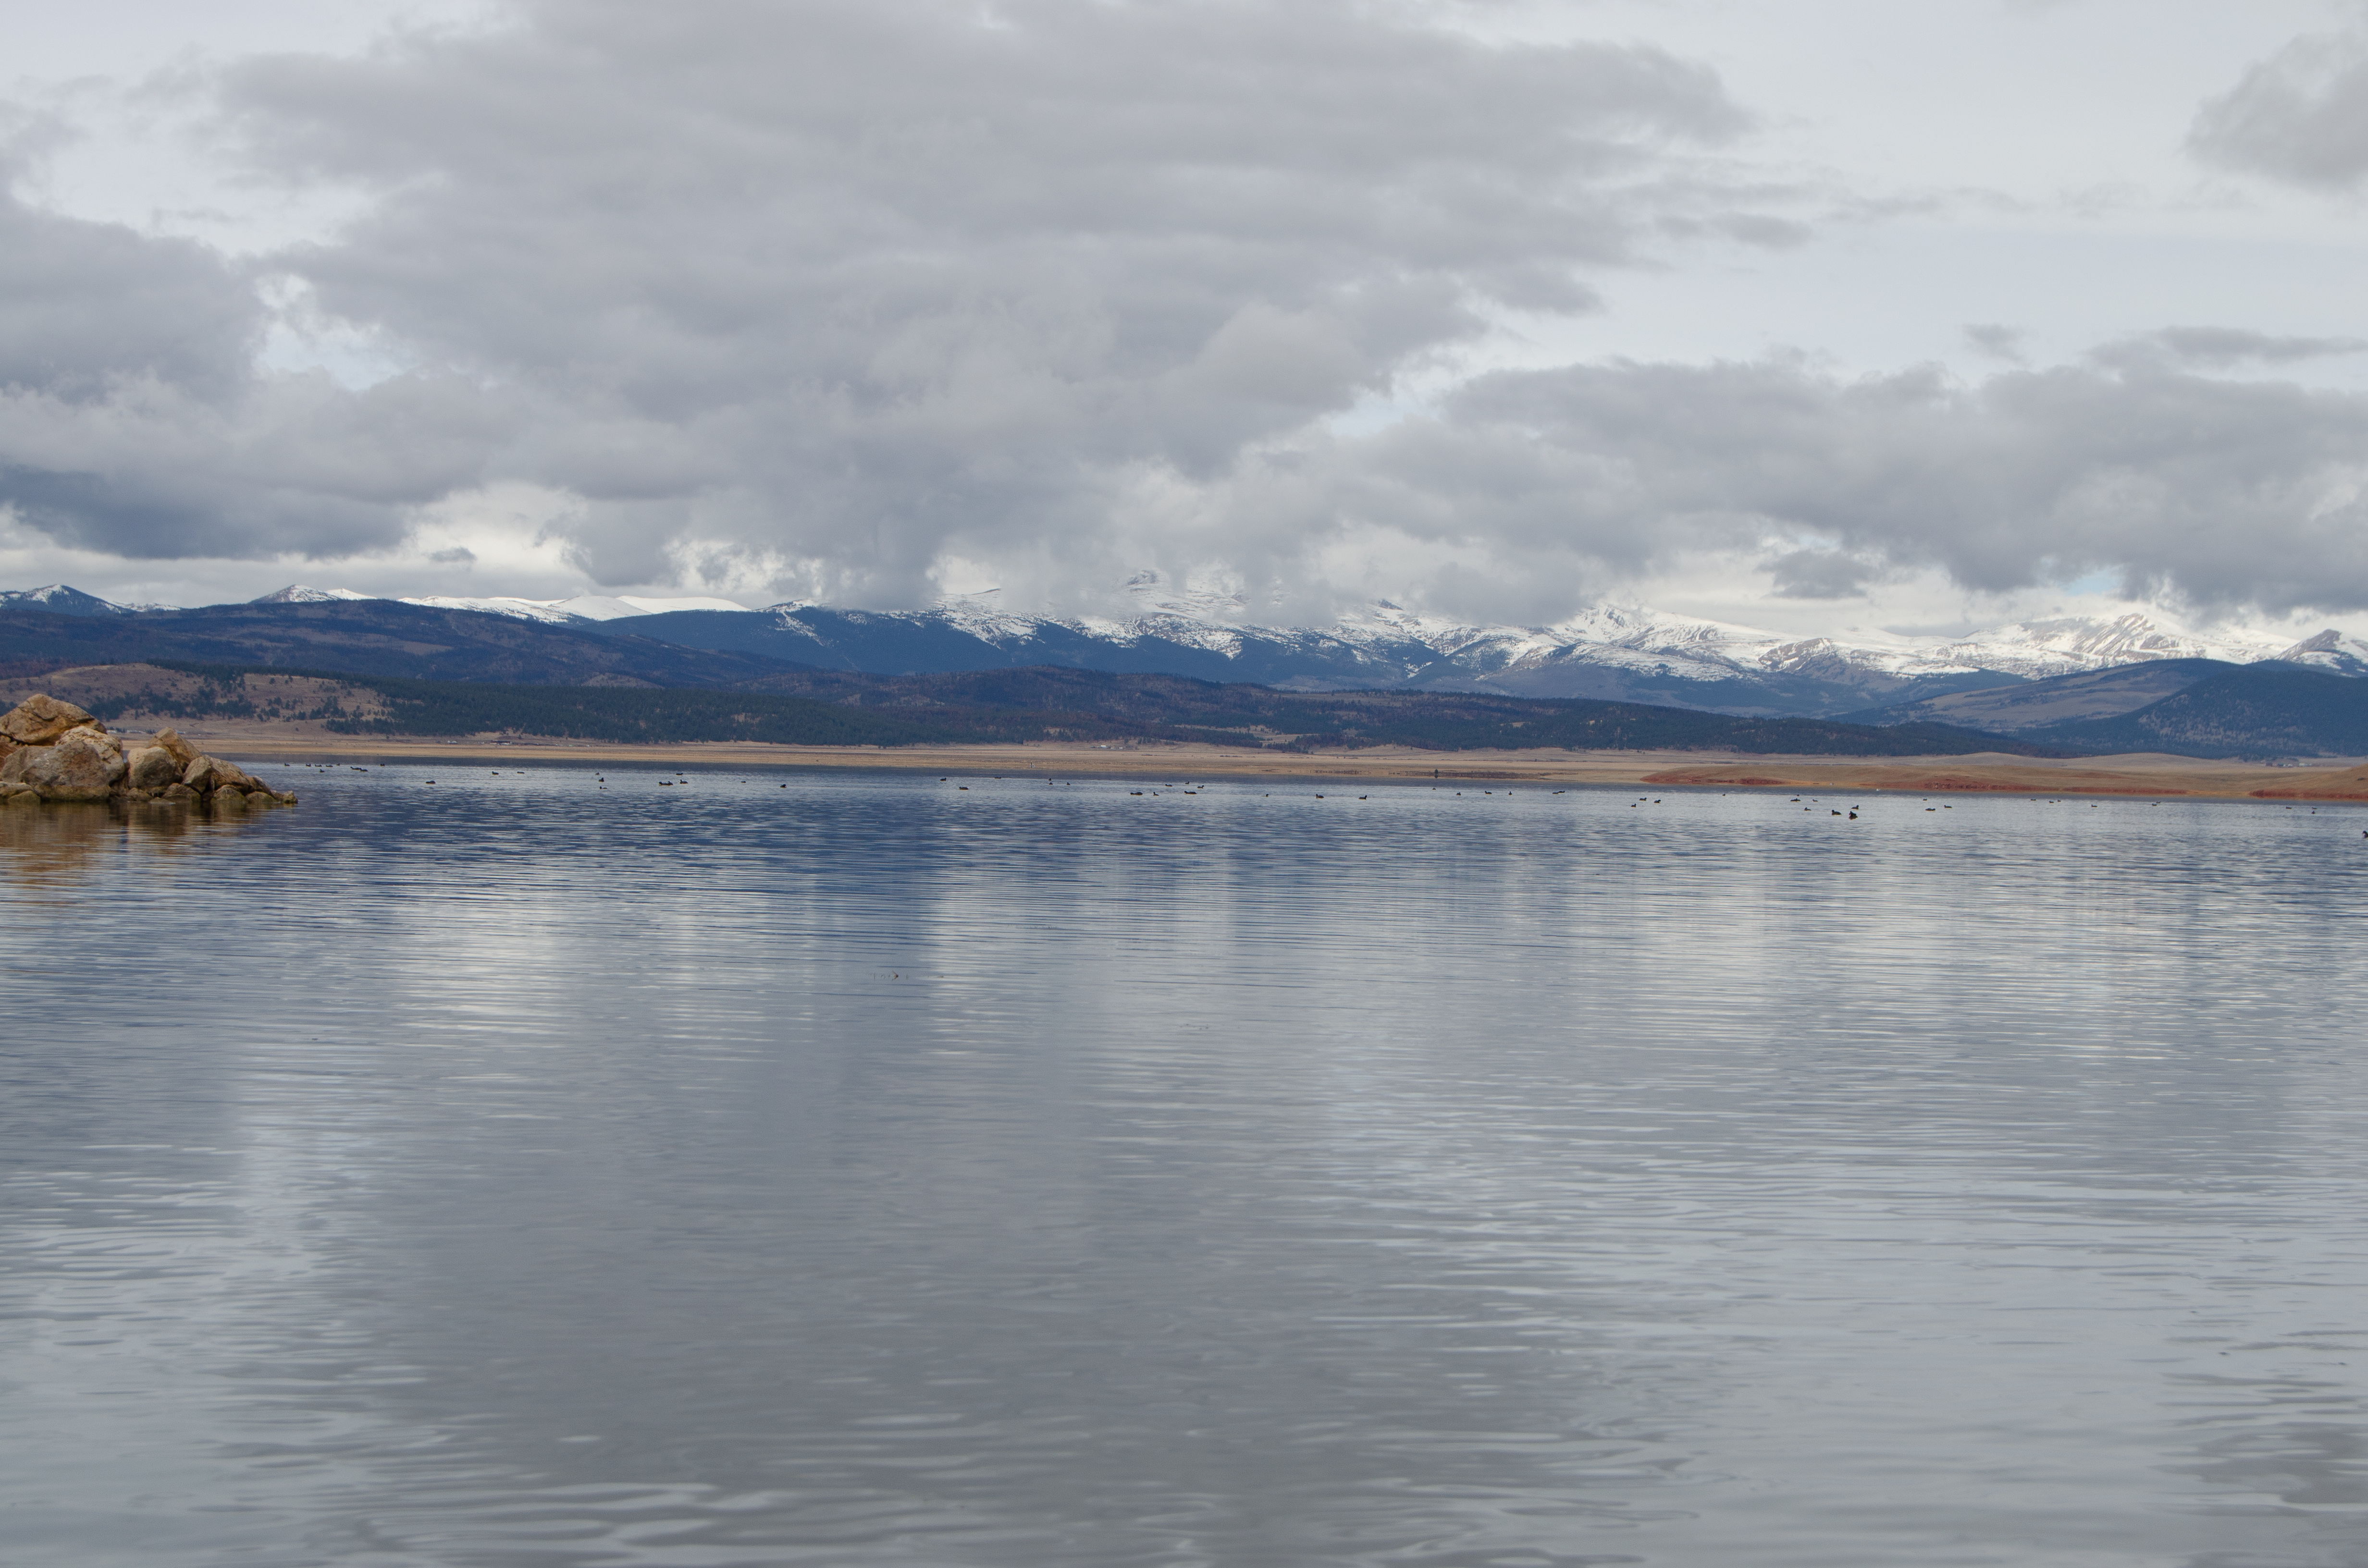 Water pools in the foreground with snow-capped peaks in the distance.